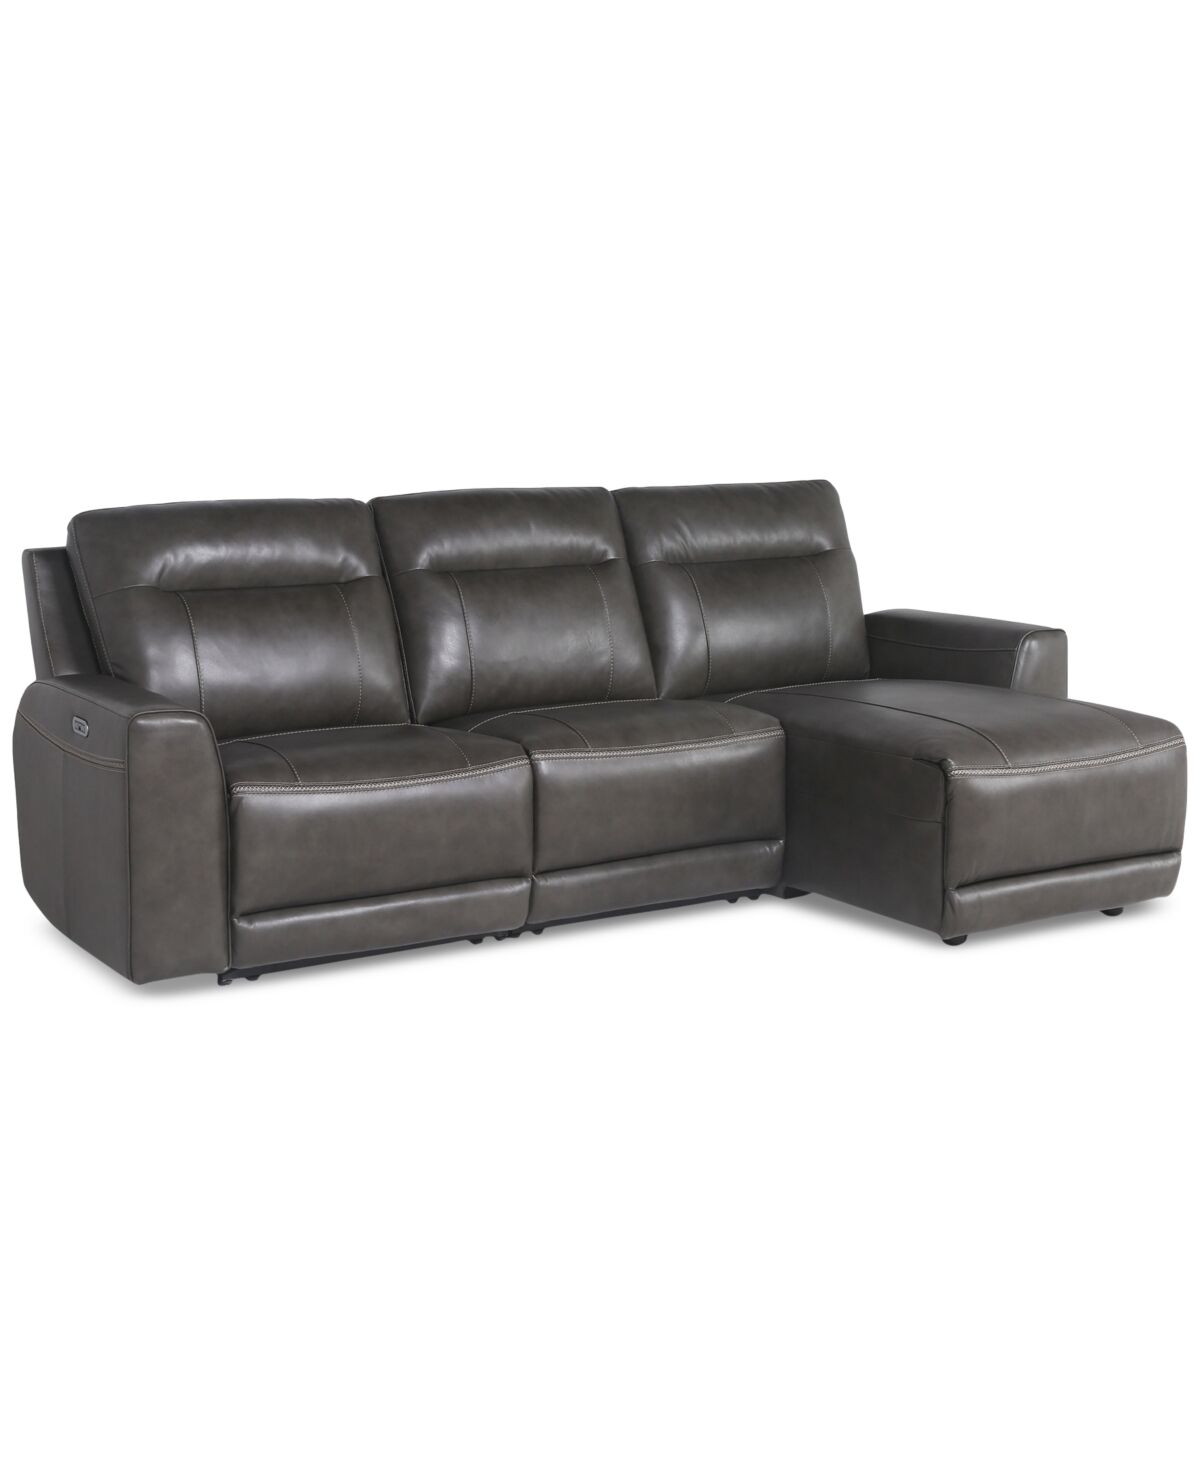 Macy's Closeout! Blairemoore 3-Pc. Leather Sofa with Power Chaise and 1 Power Recliner, Created for Macy's - Charcoal